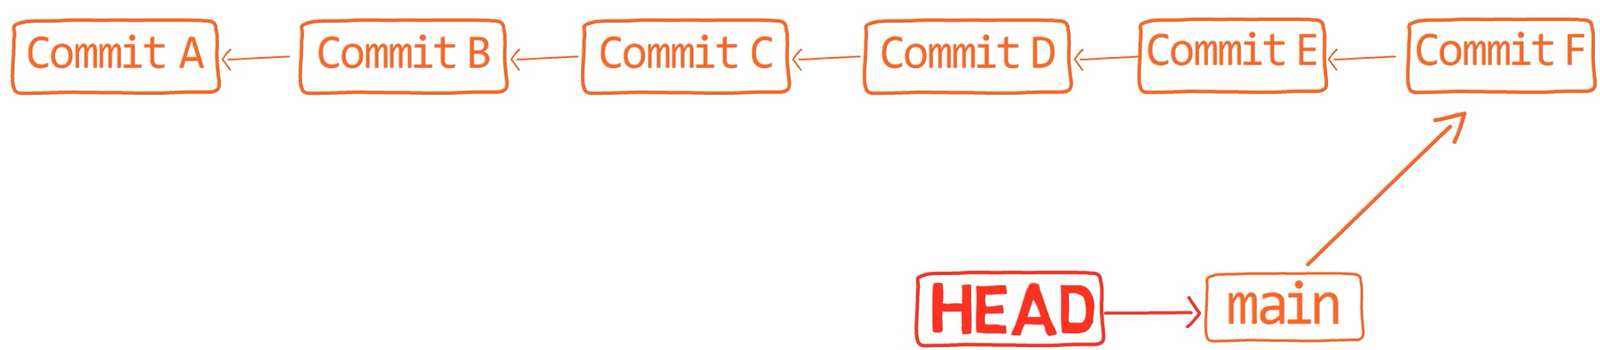 Another commit history